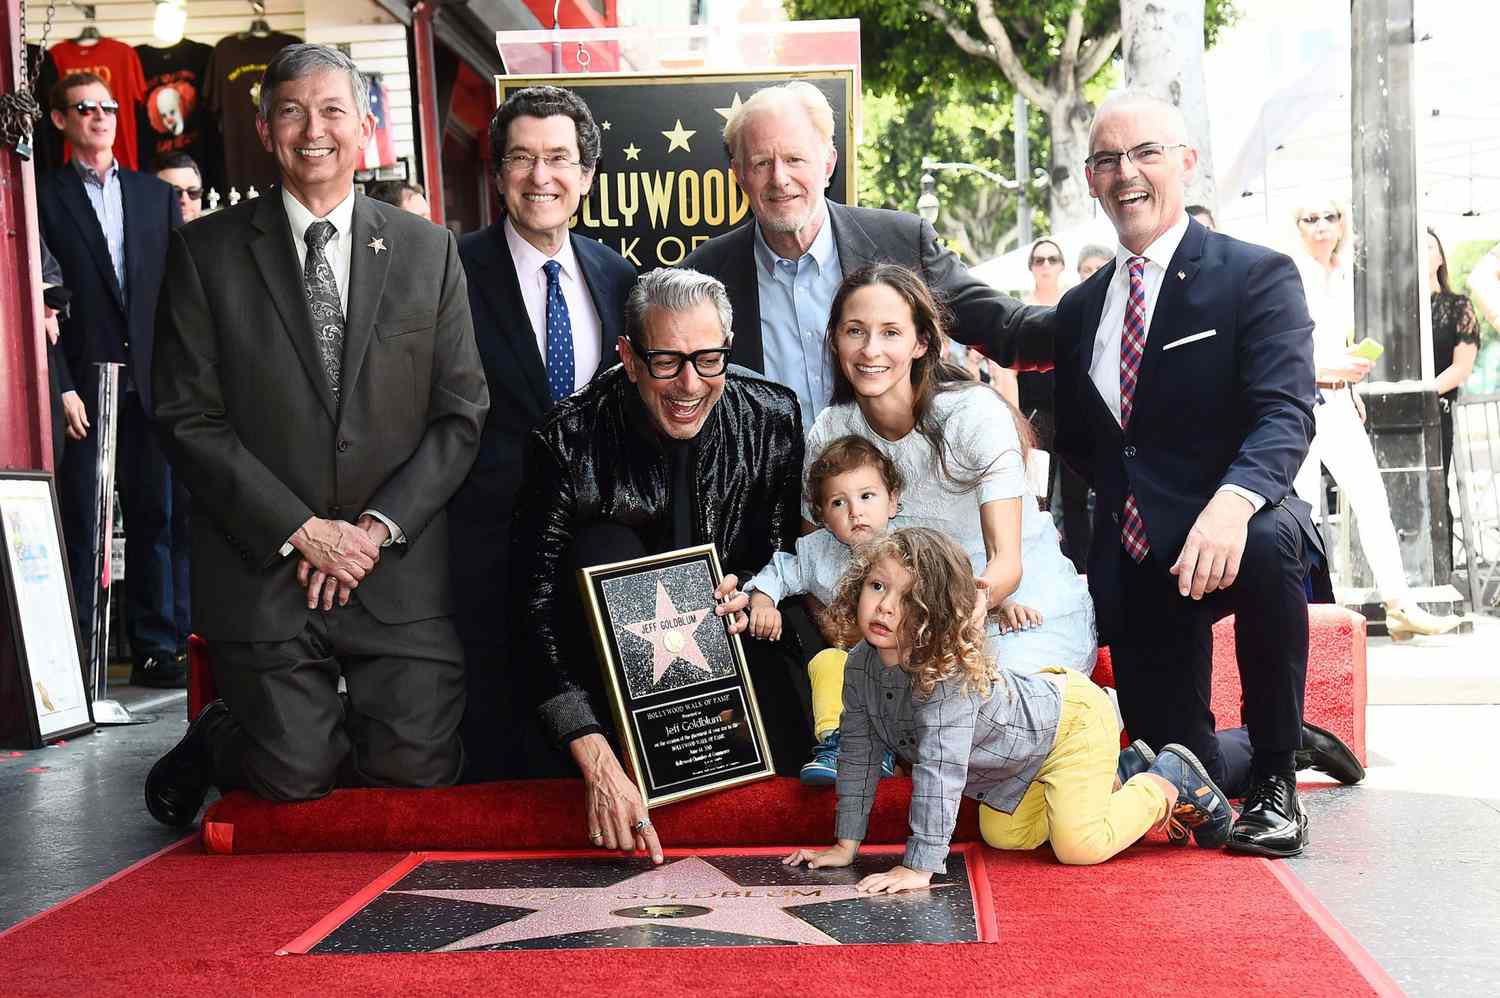 Jeff Goldblum honored with a star on the Hollywood Walk of Fame, Los Angeles, USA - 14 Jun 2018